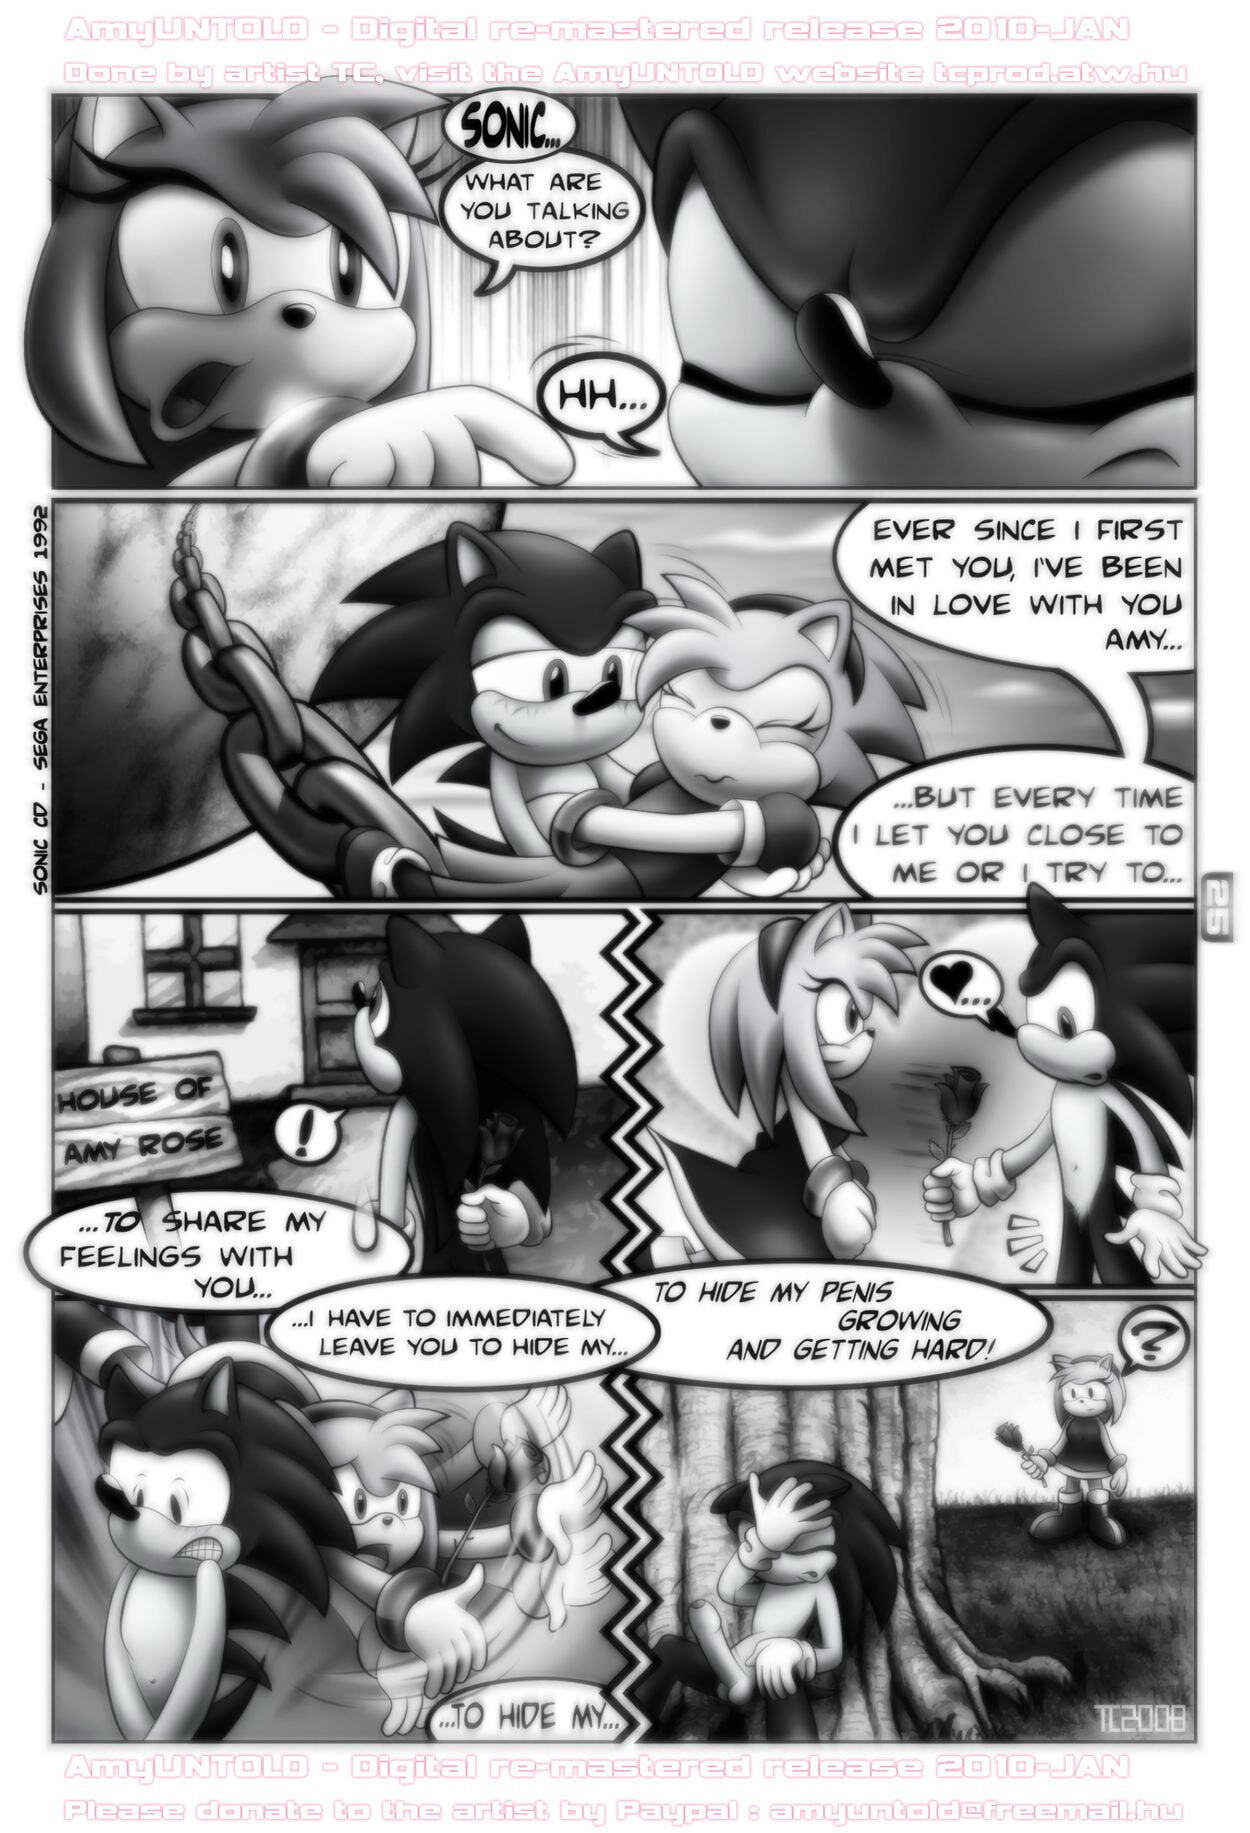 Amy Untold - Finally - Page 25